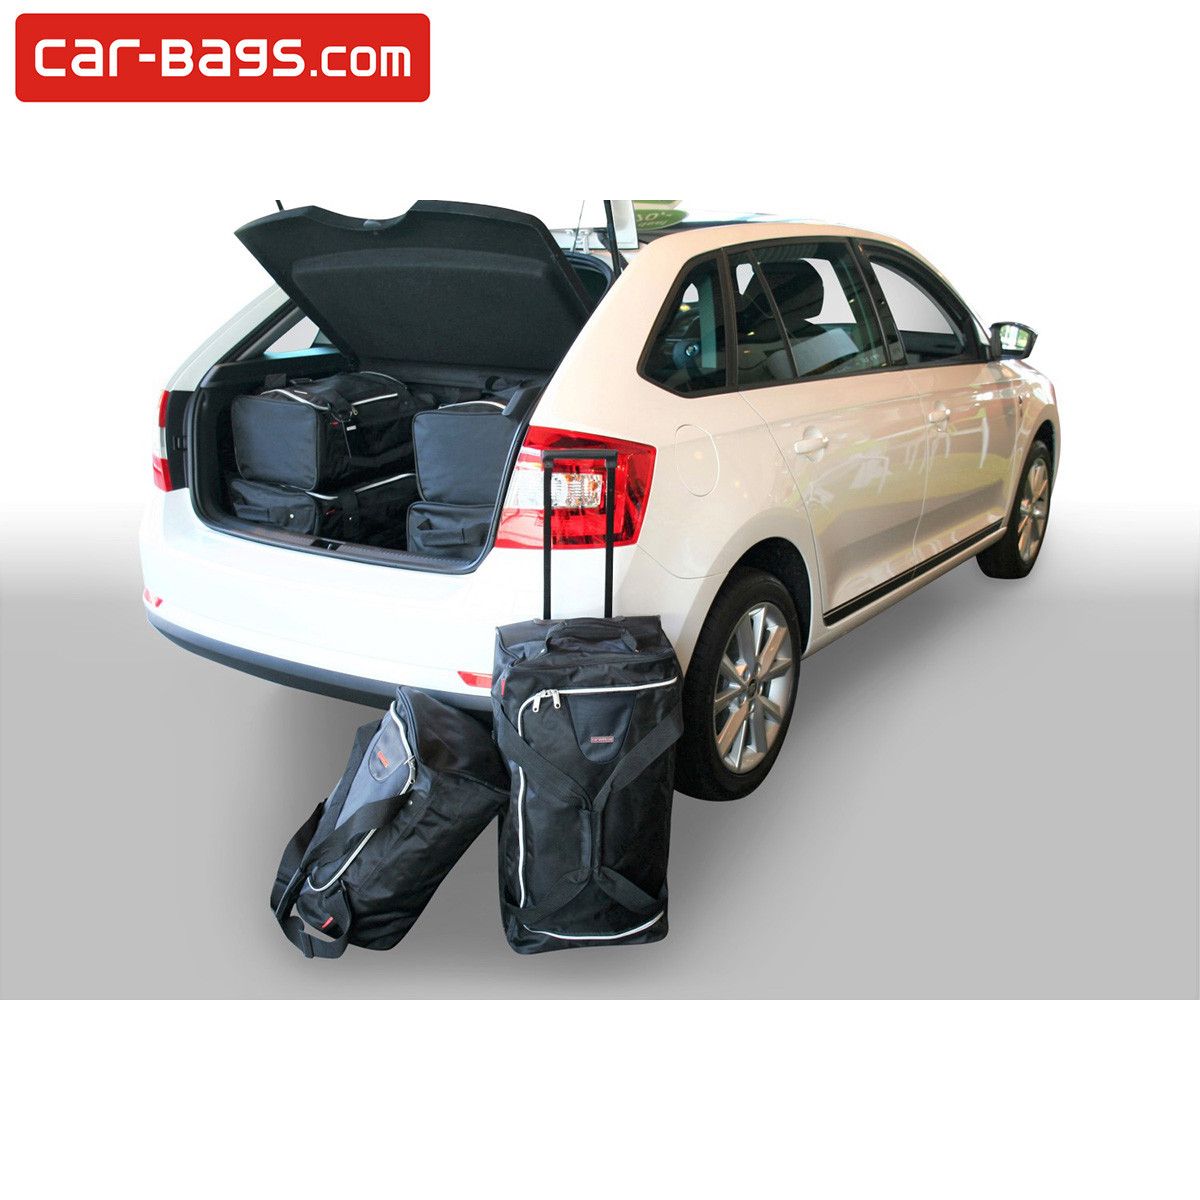 Travel bags fits Skoda Rapid Spaceback (NH1) tailor made (6 bags), Time  and space saving for $ 379, Perfect fit Car Bags